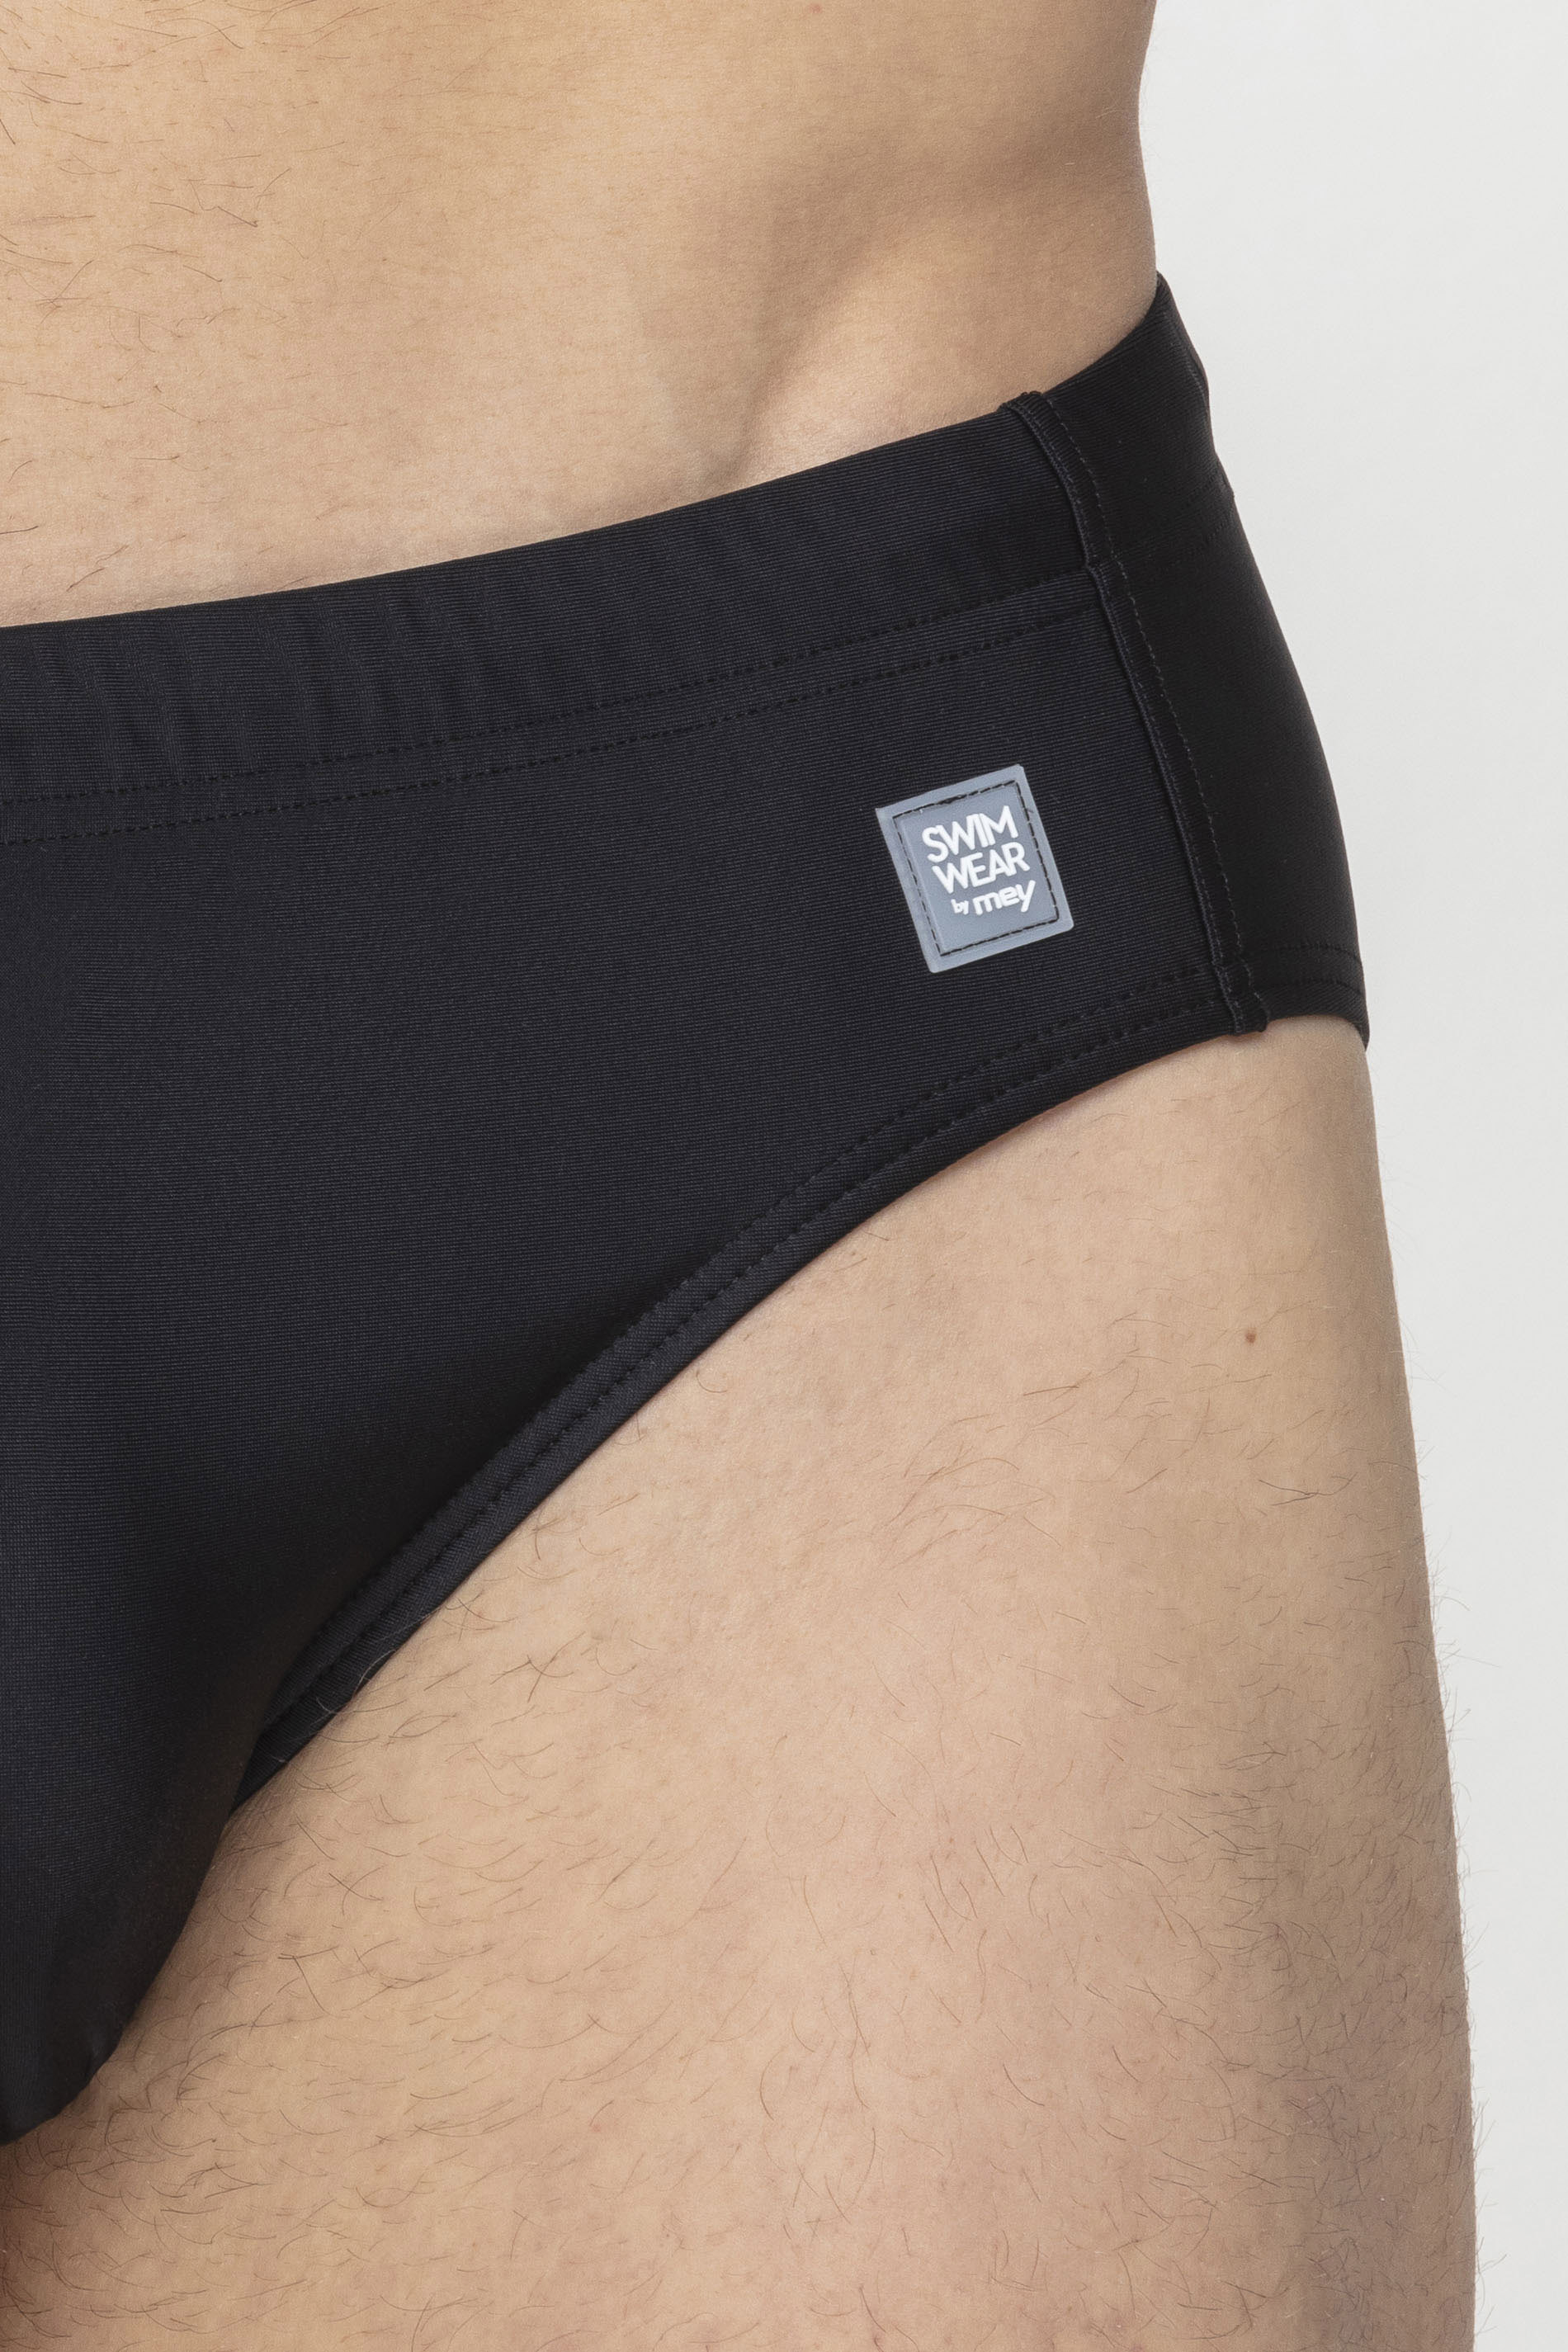 Badehose Black Serie English Harbour  Detail View 01 | mey®